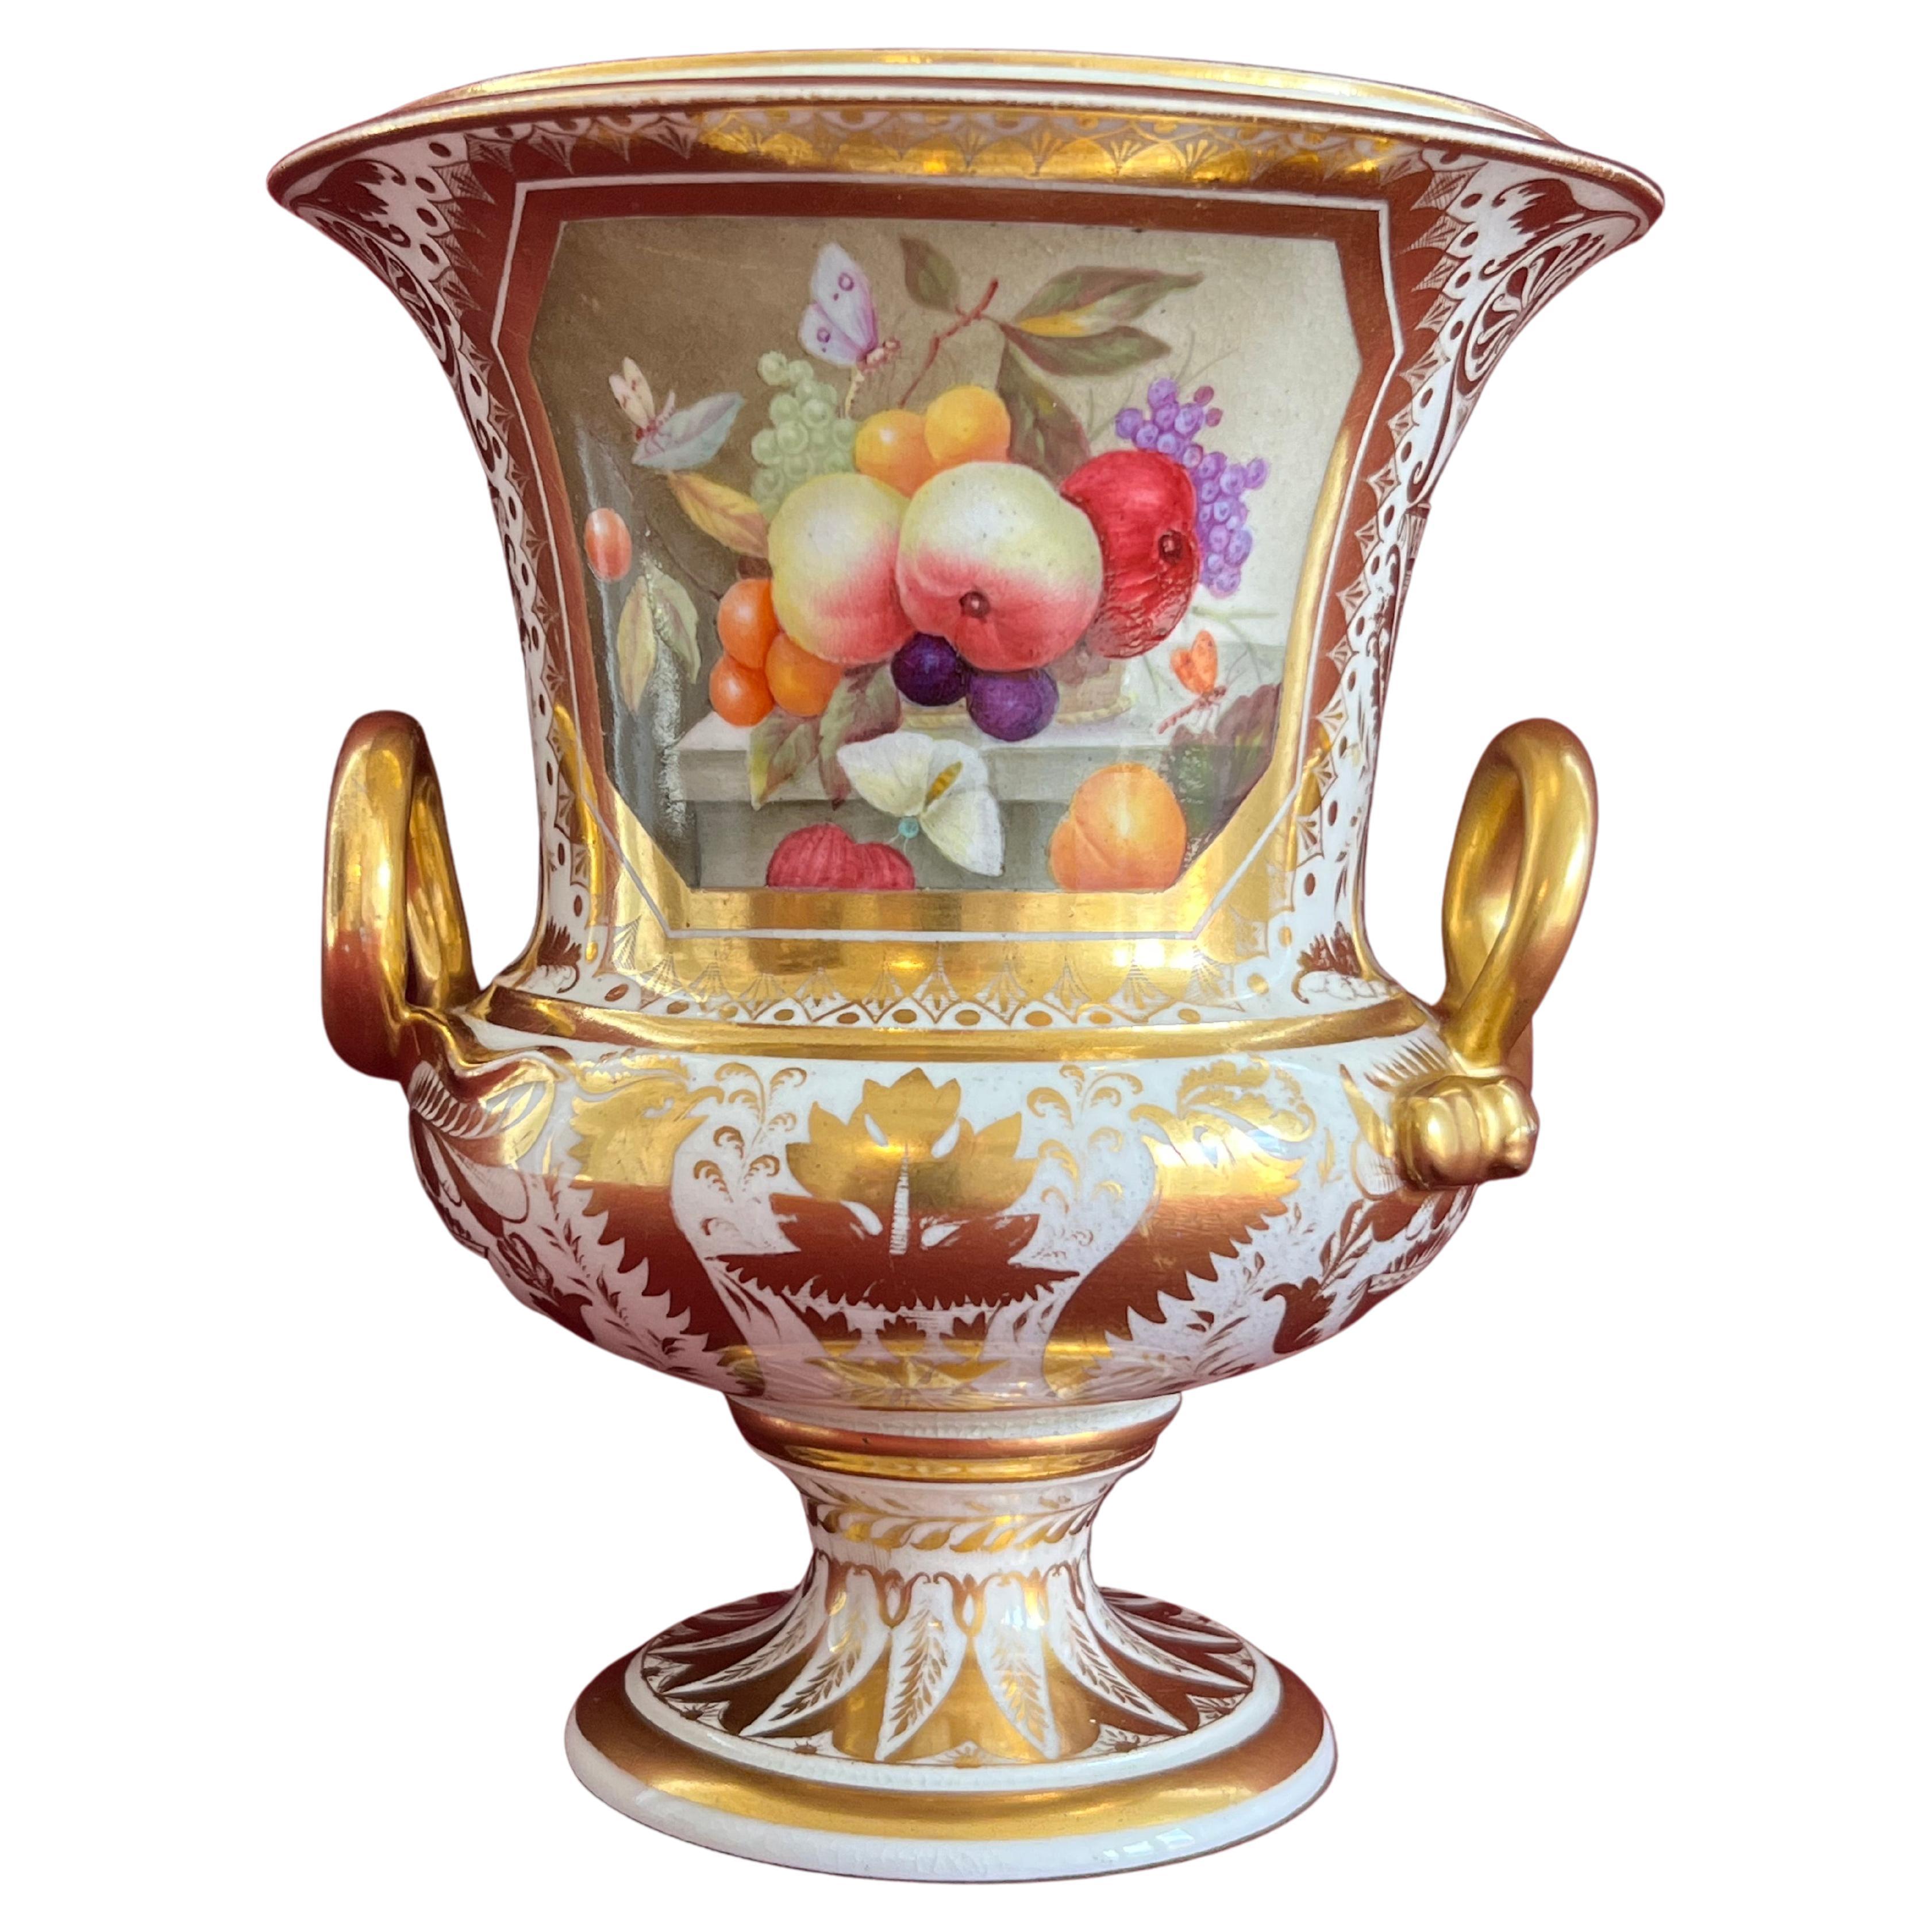 Fine Derby Porcelain Vase C.1815 Decorated in the Manner of Thomas Steele For Sale